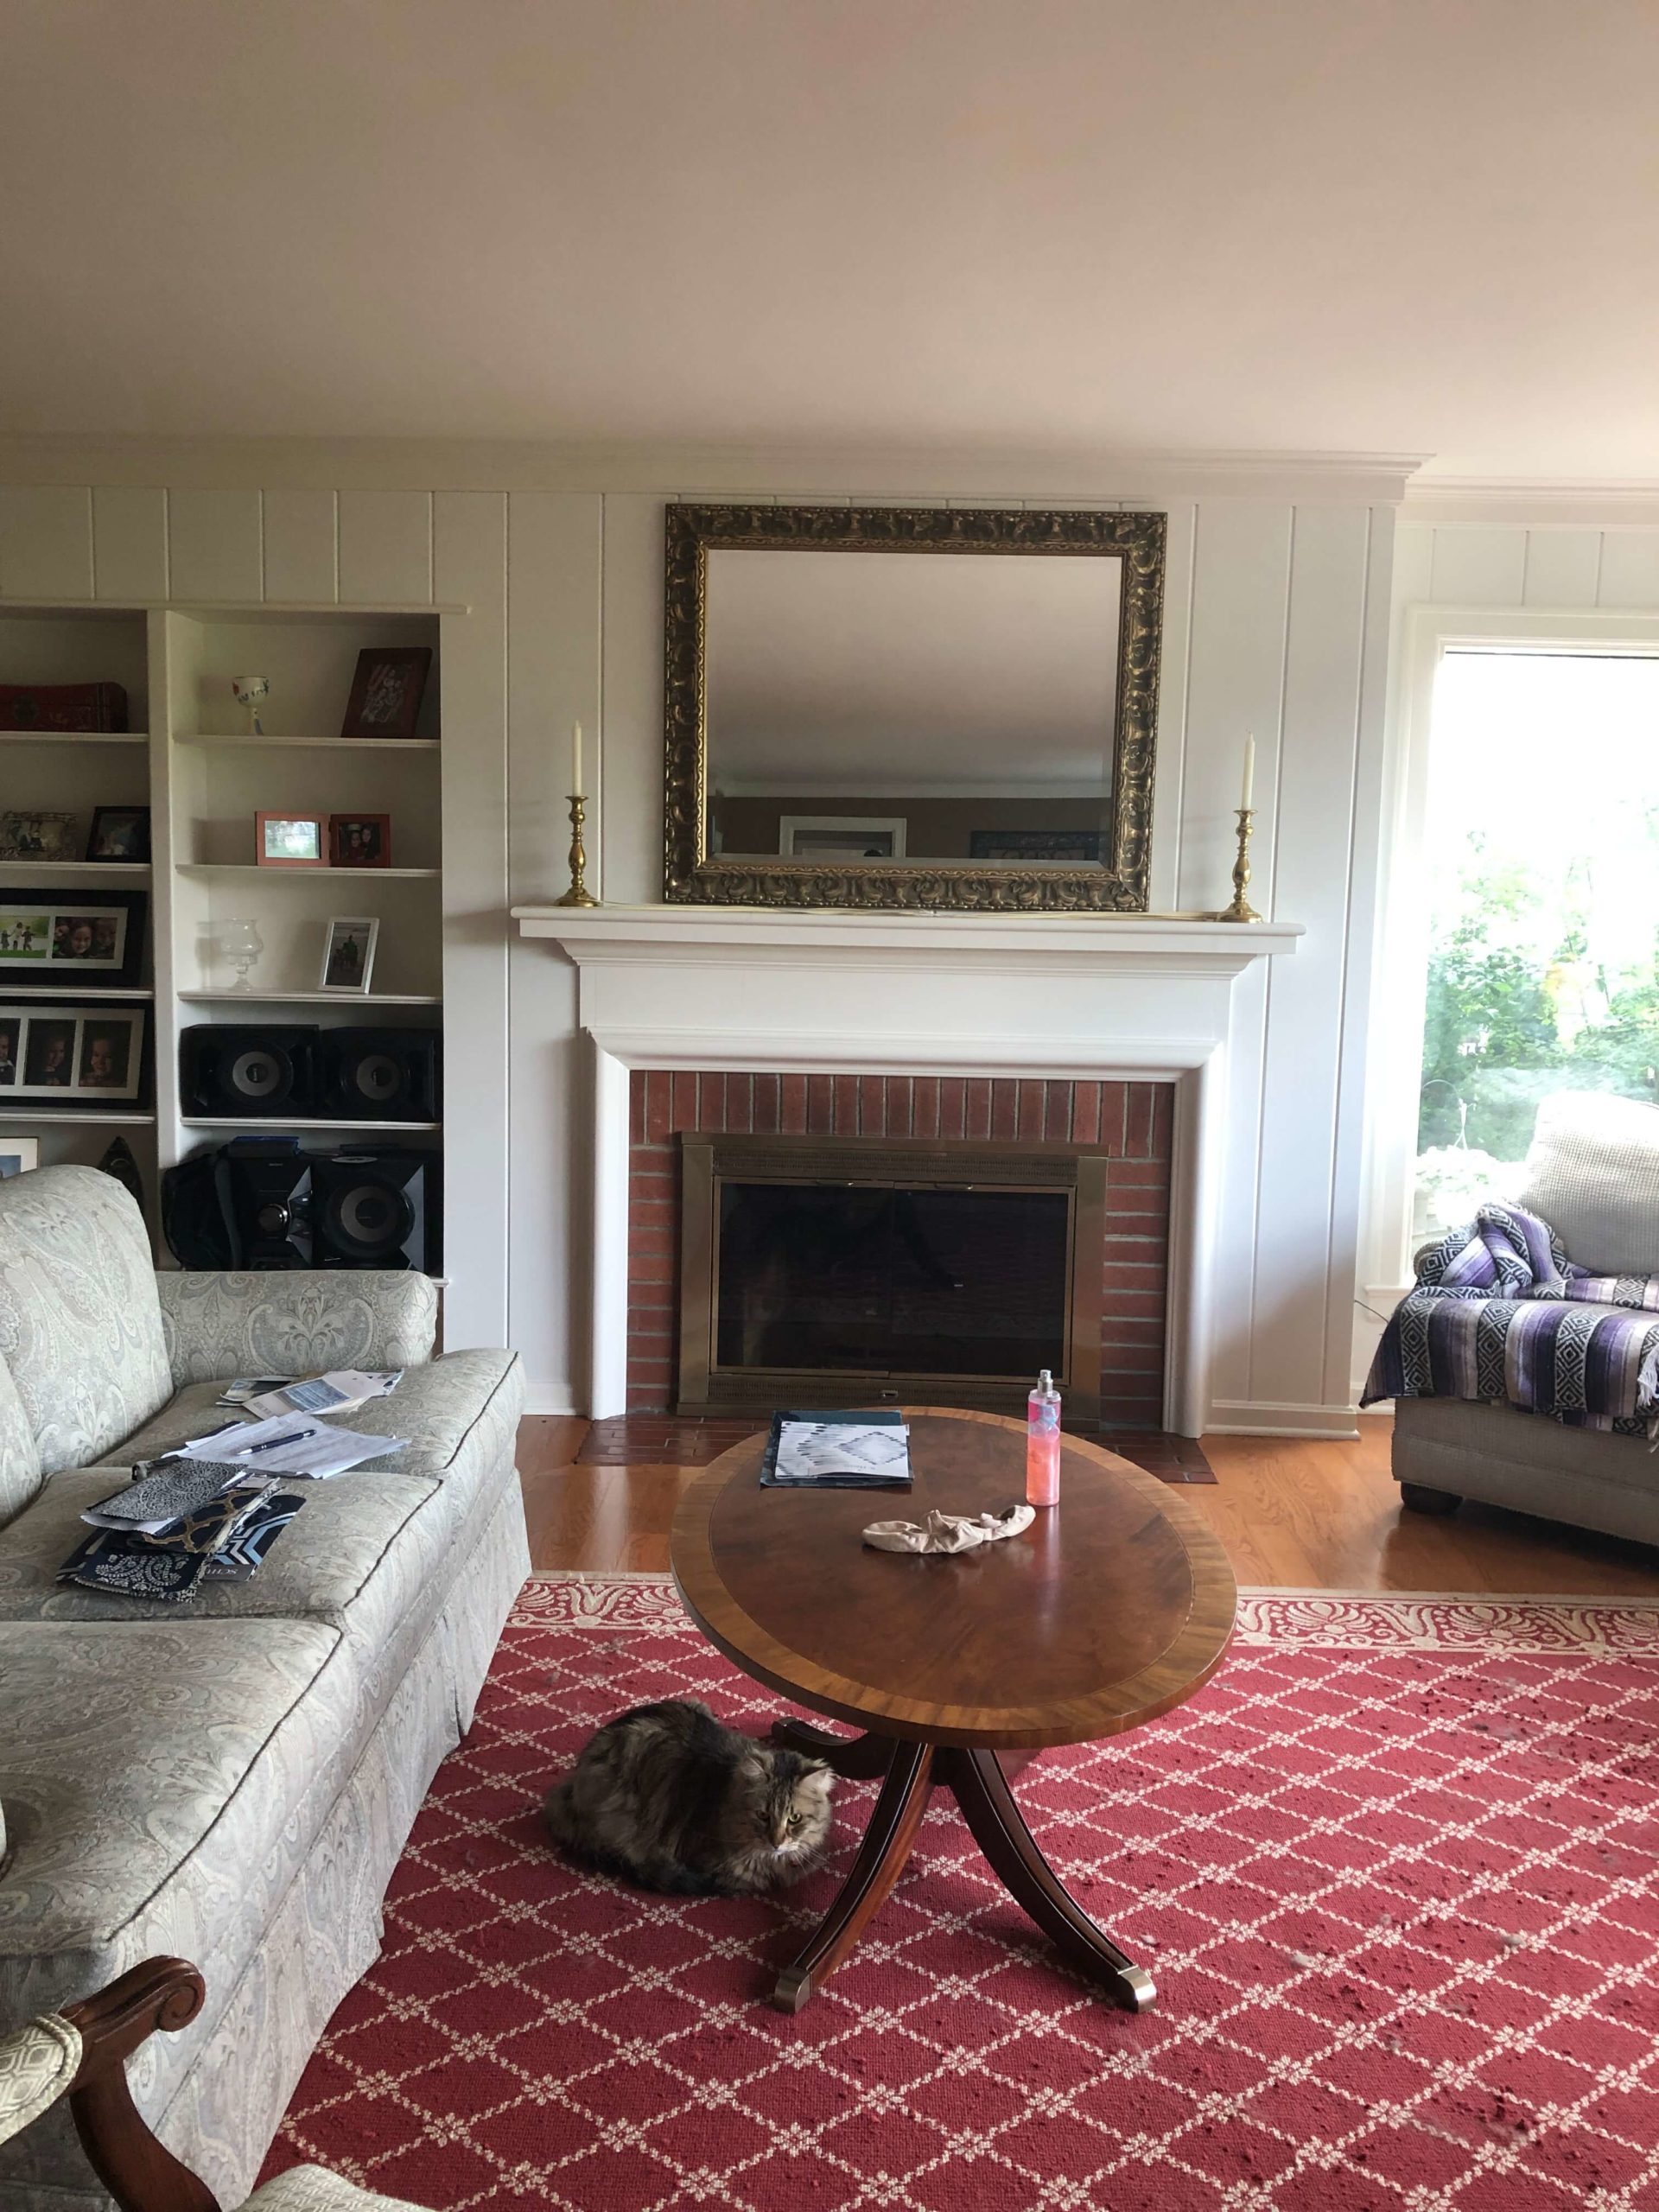 Cat on Hooked Rug Family Room Space Before Eclectic Interiors